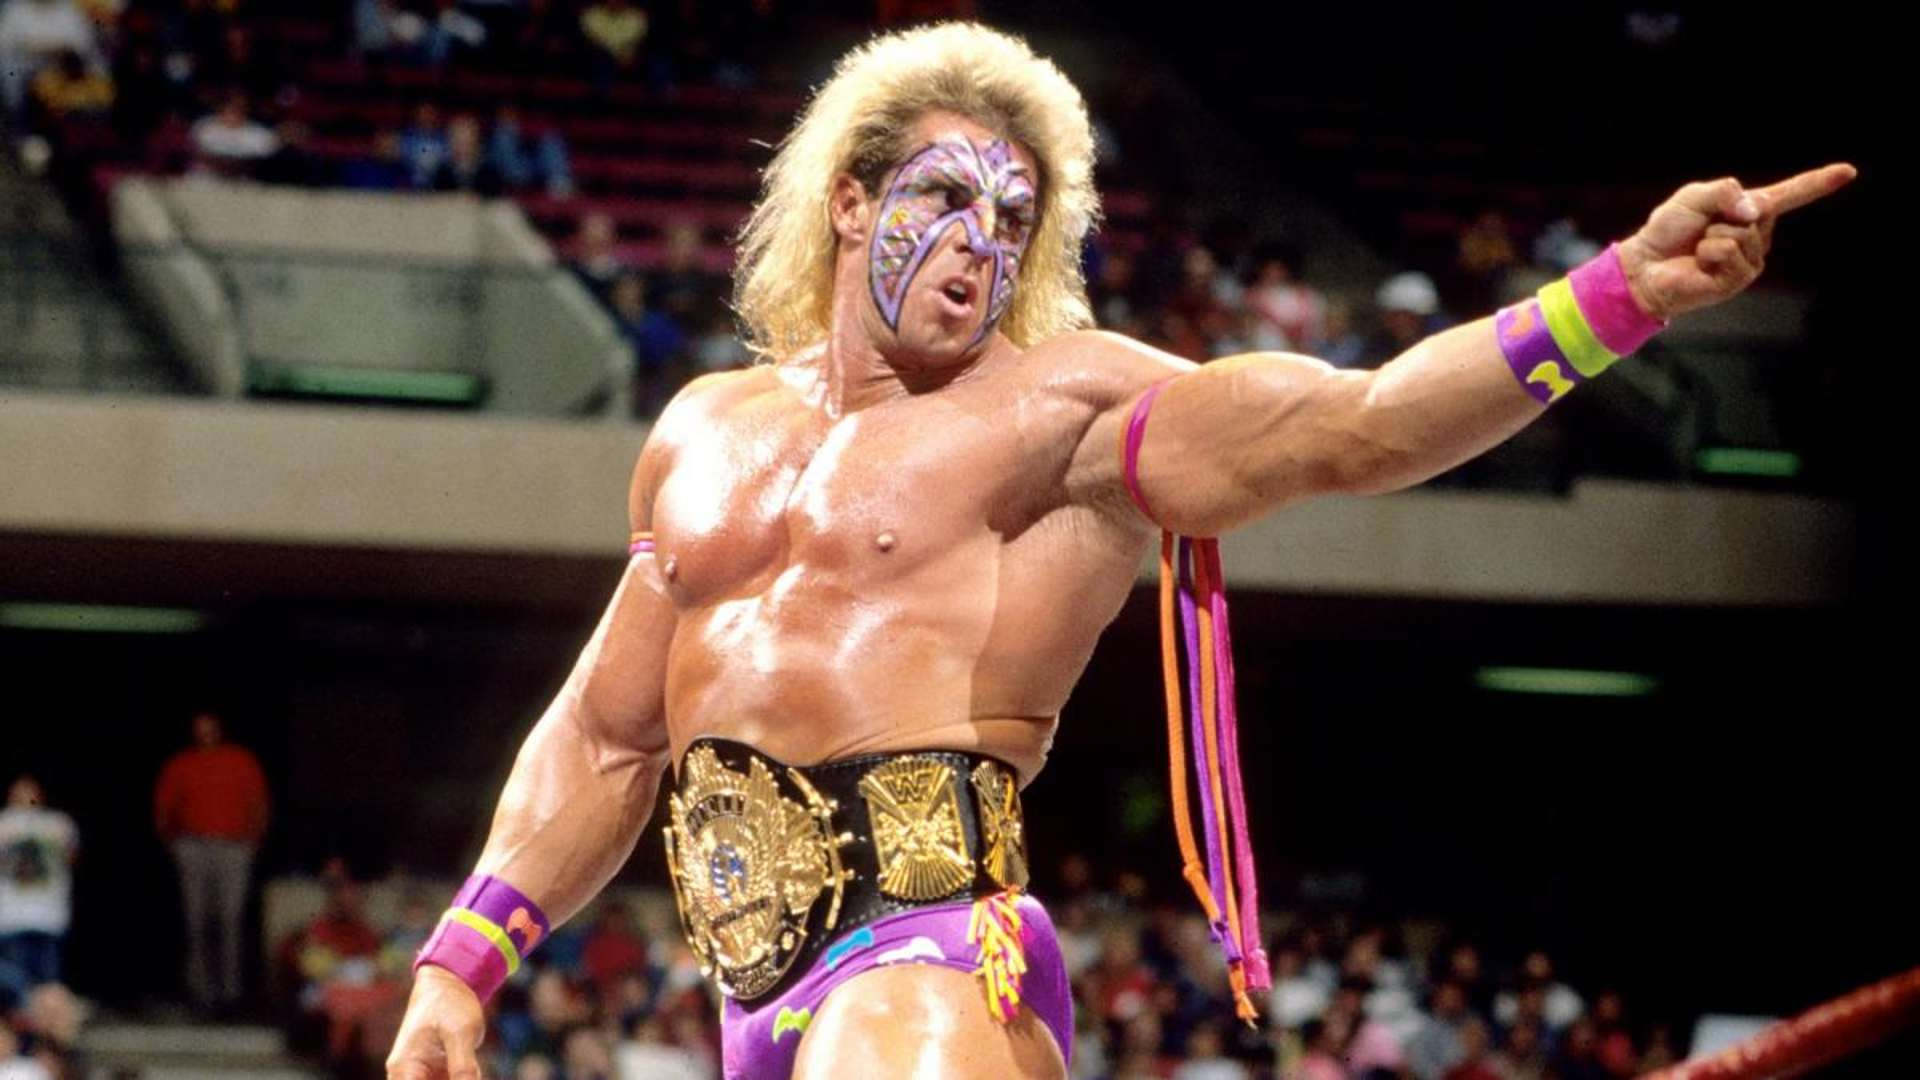 1920x1080 The Ultimate Warrior Height, Name, Weight, Age, Wife, Children, Profile